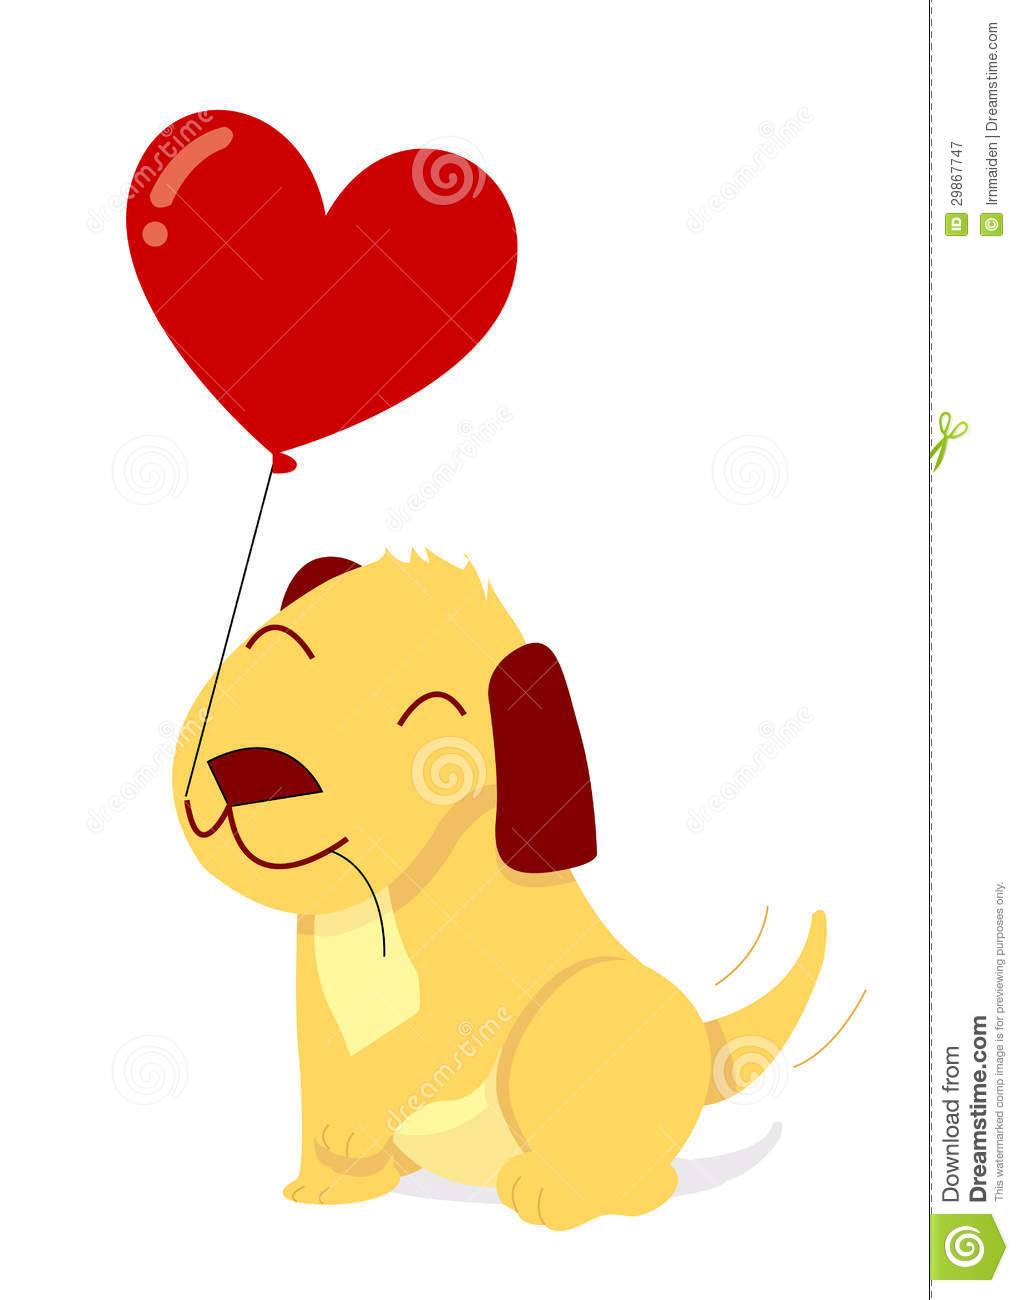 Valentine Puppy With Balloon Royalty Free Stock Photography   Image    